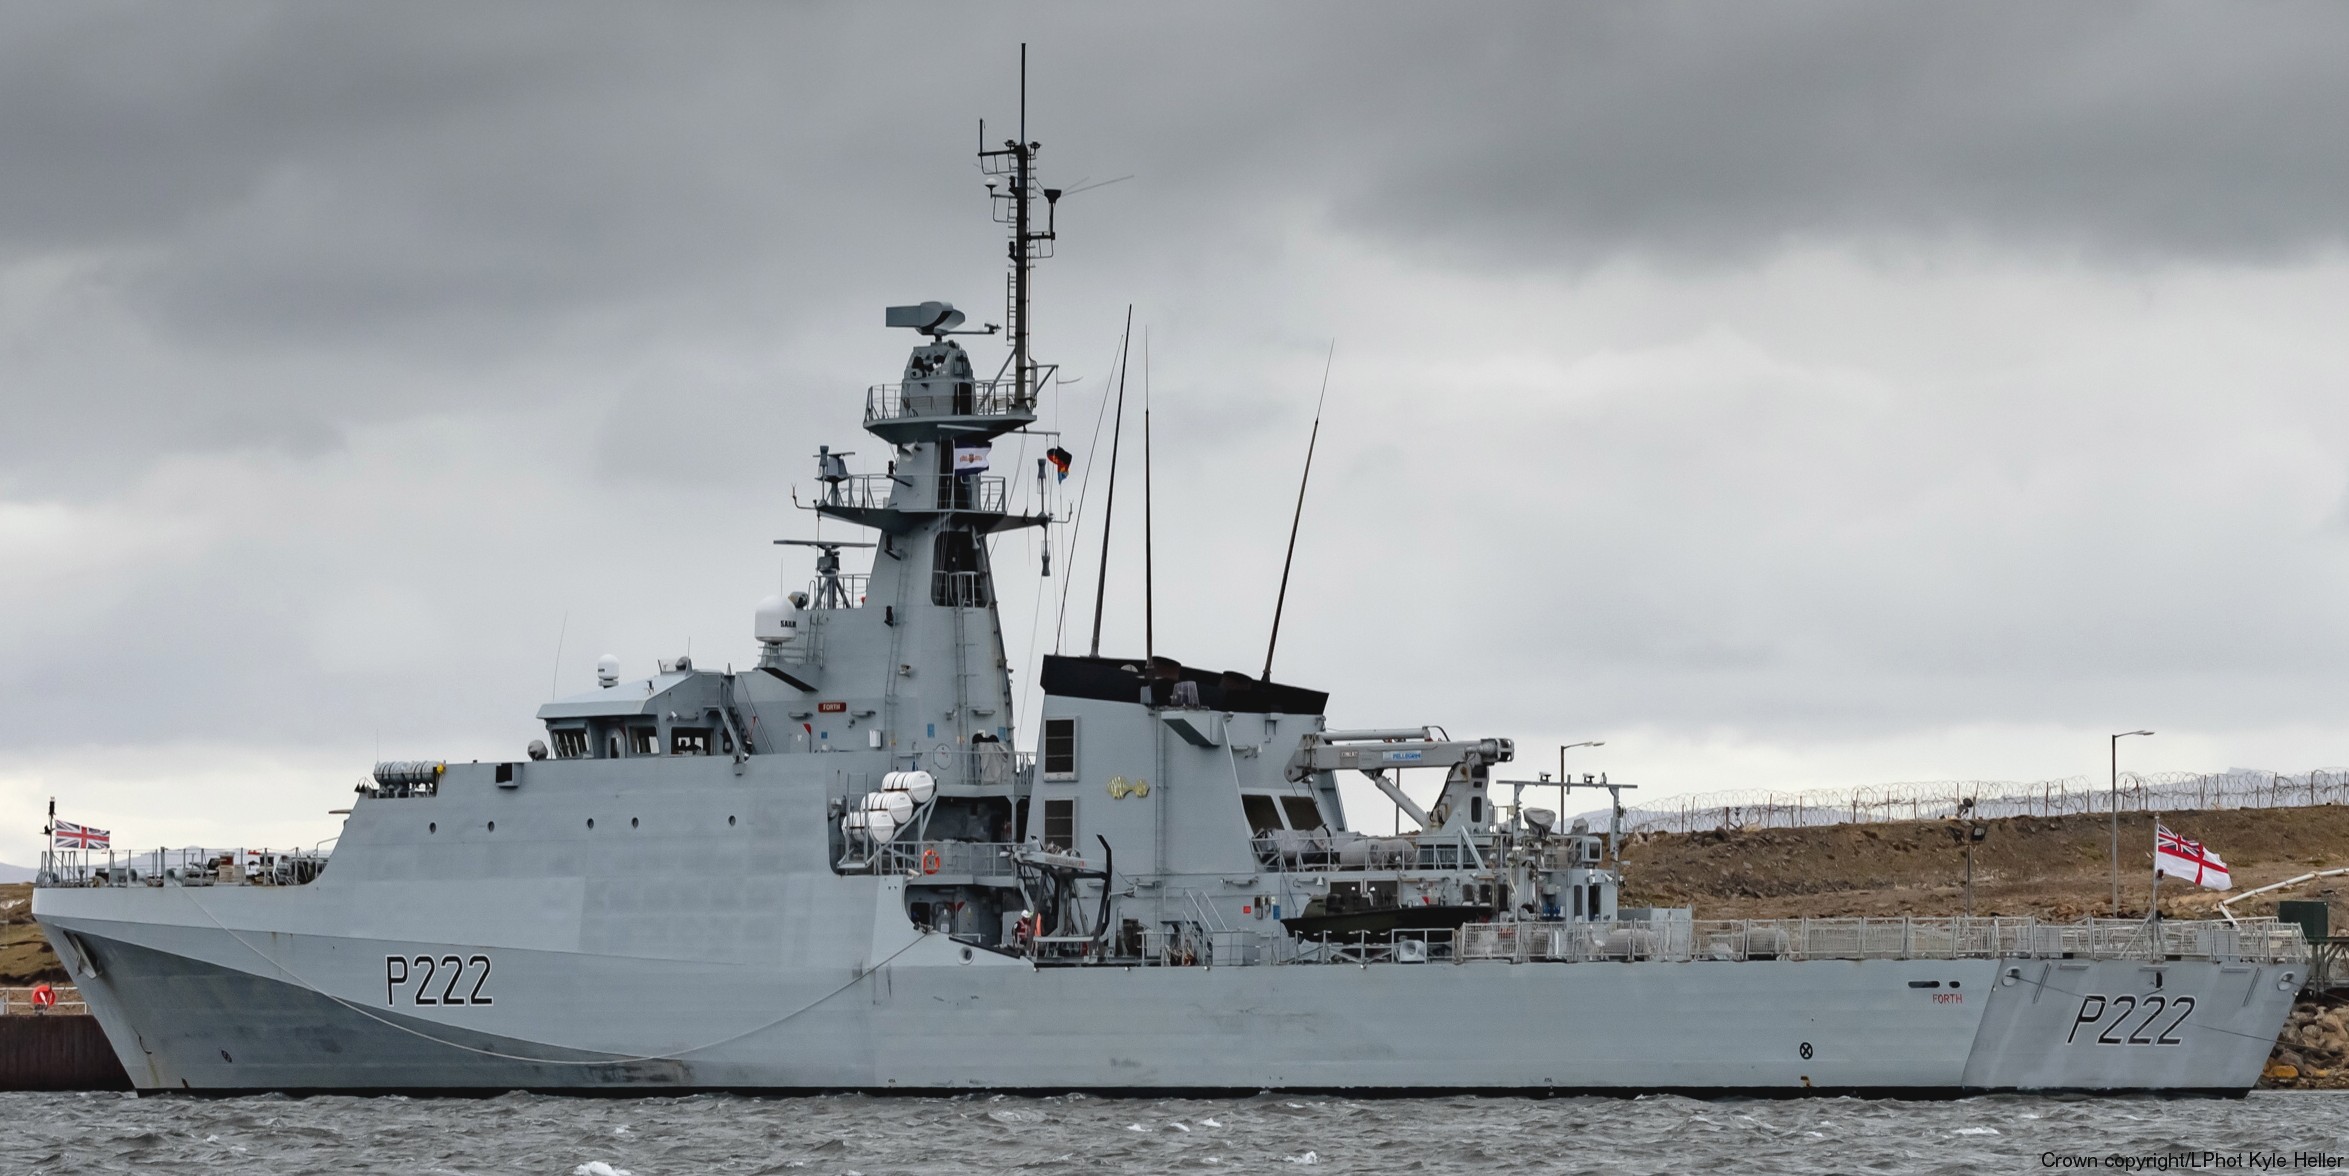 p-222 hms forth river class offshore patrol vessel opv royal navy 39